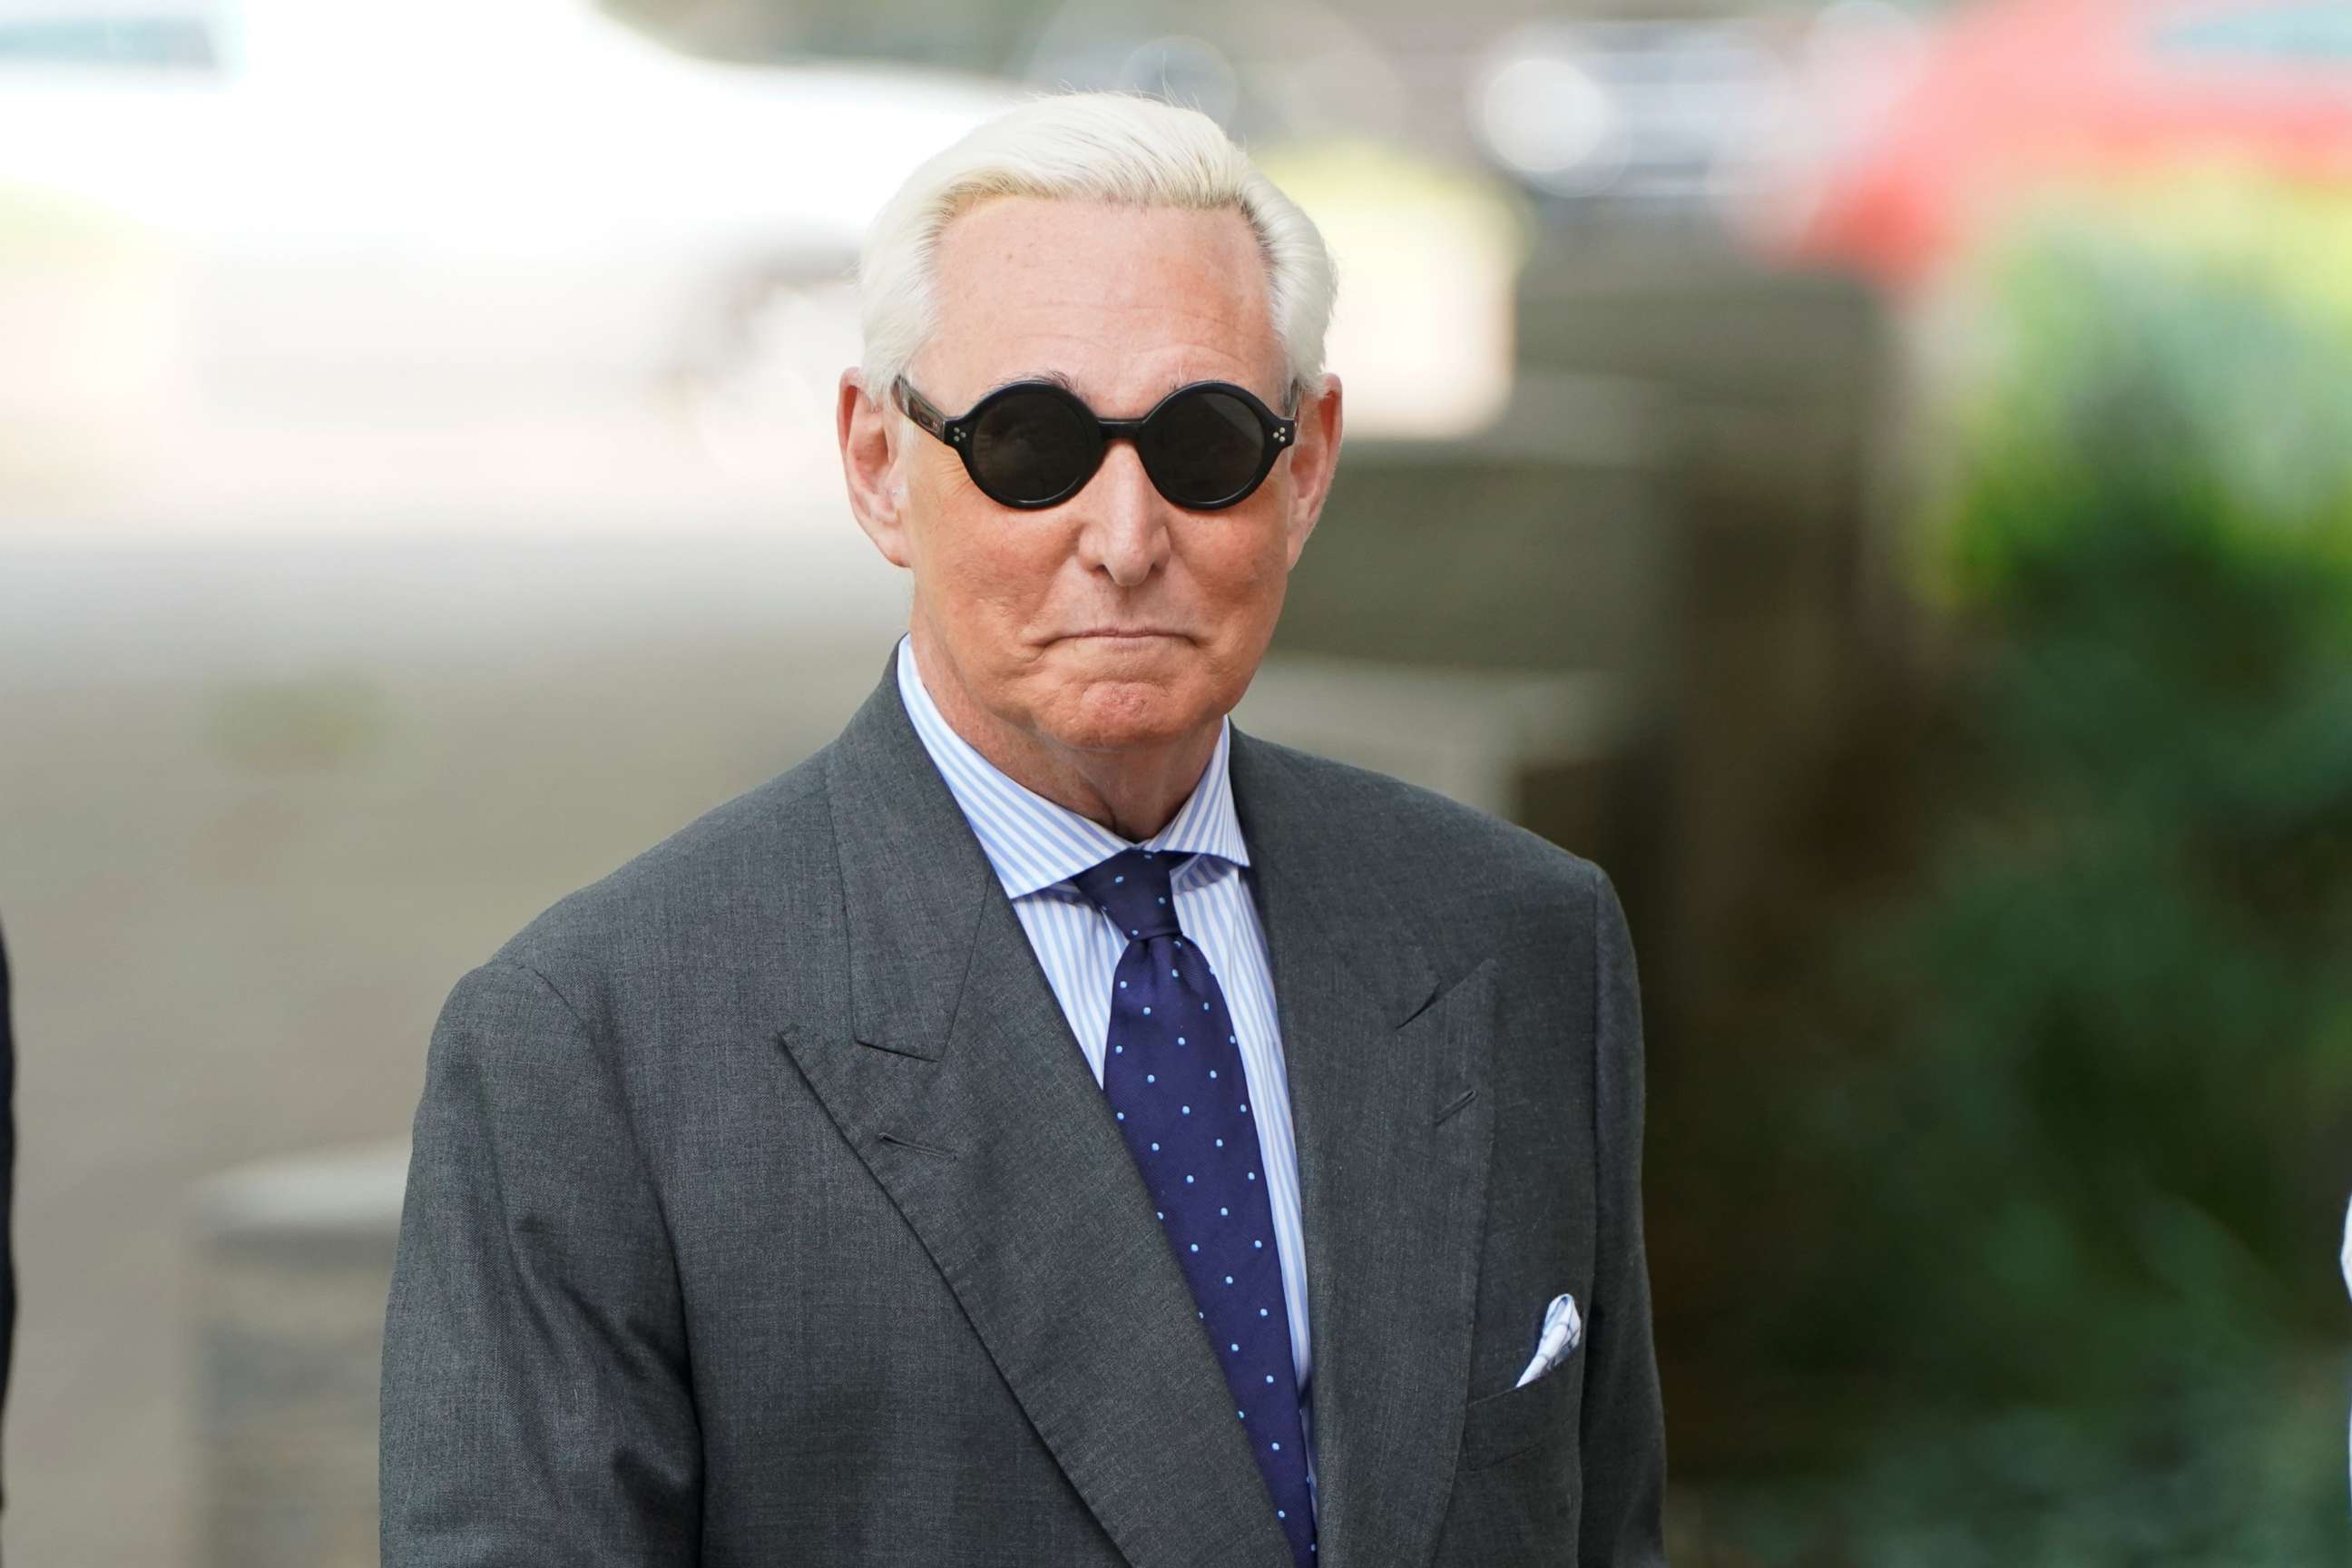 PHOTO: Roger Stone, longtime political ally of President Donald Trump, arrives for a status hearing in the criminal case against him brought by Special Counsel Robert Mueller at U.S. District Court in Washington D.C., April 30, 2019. 